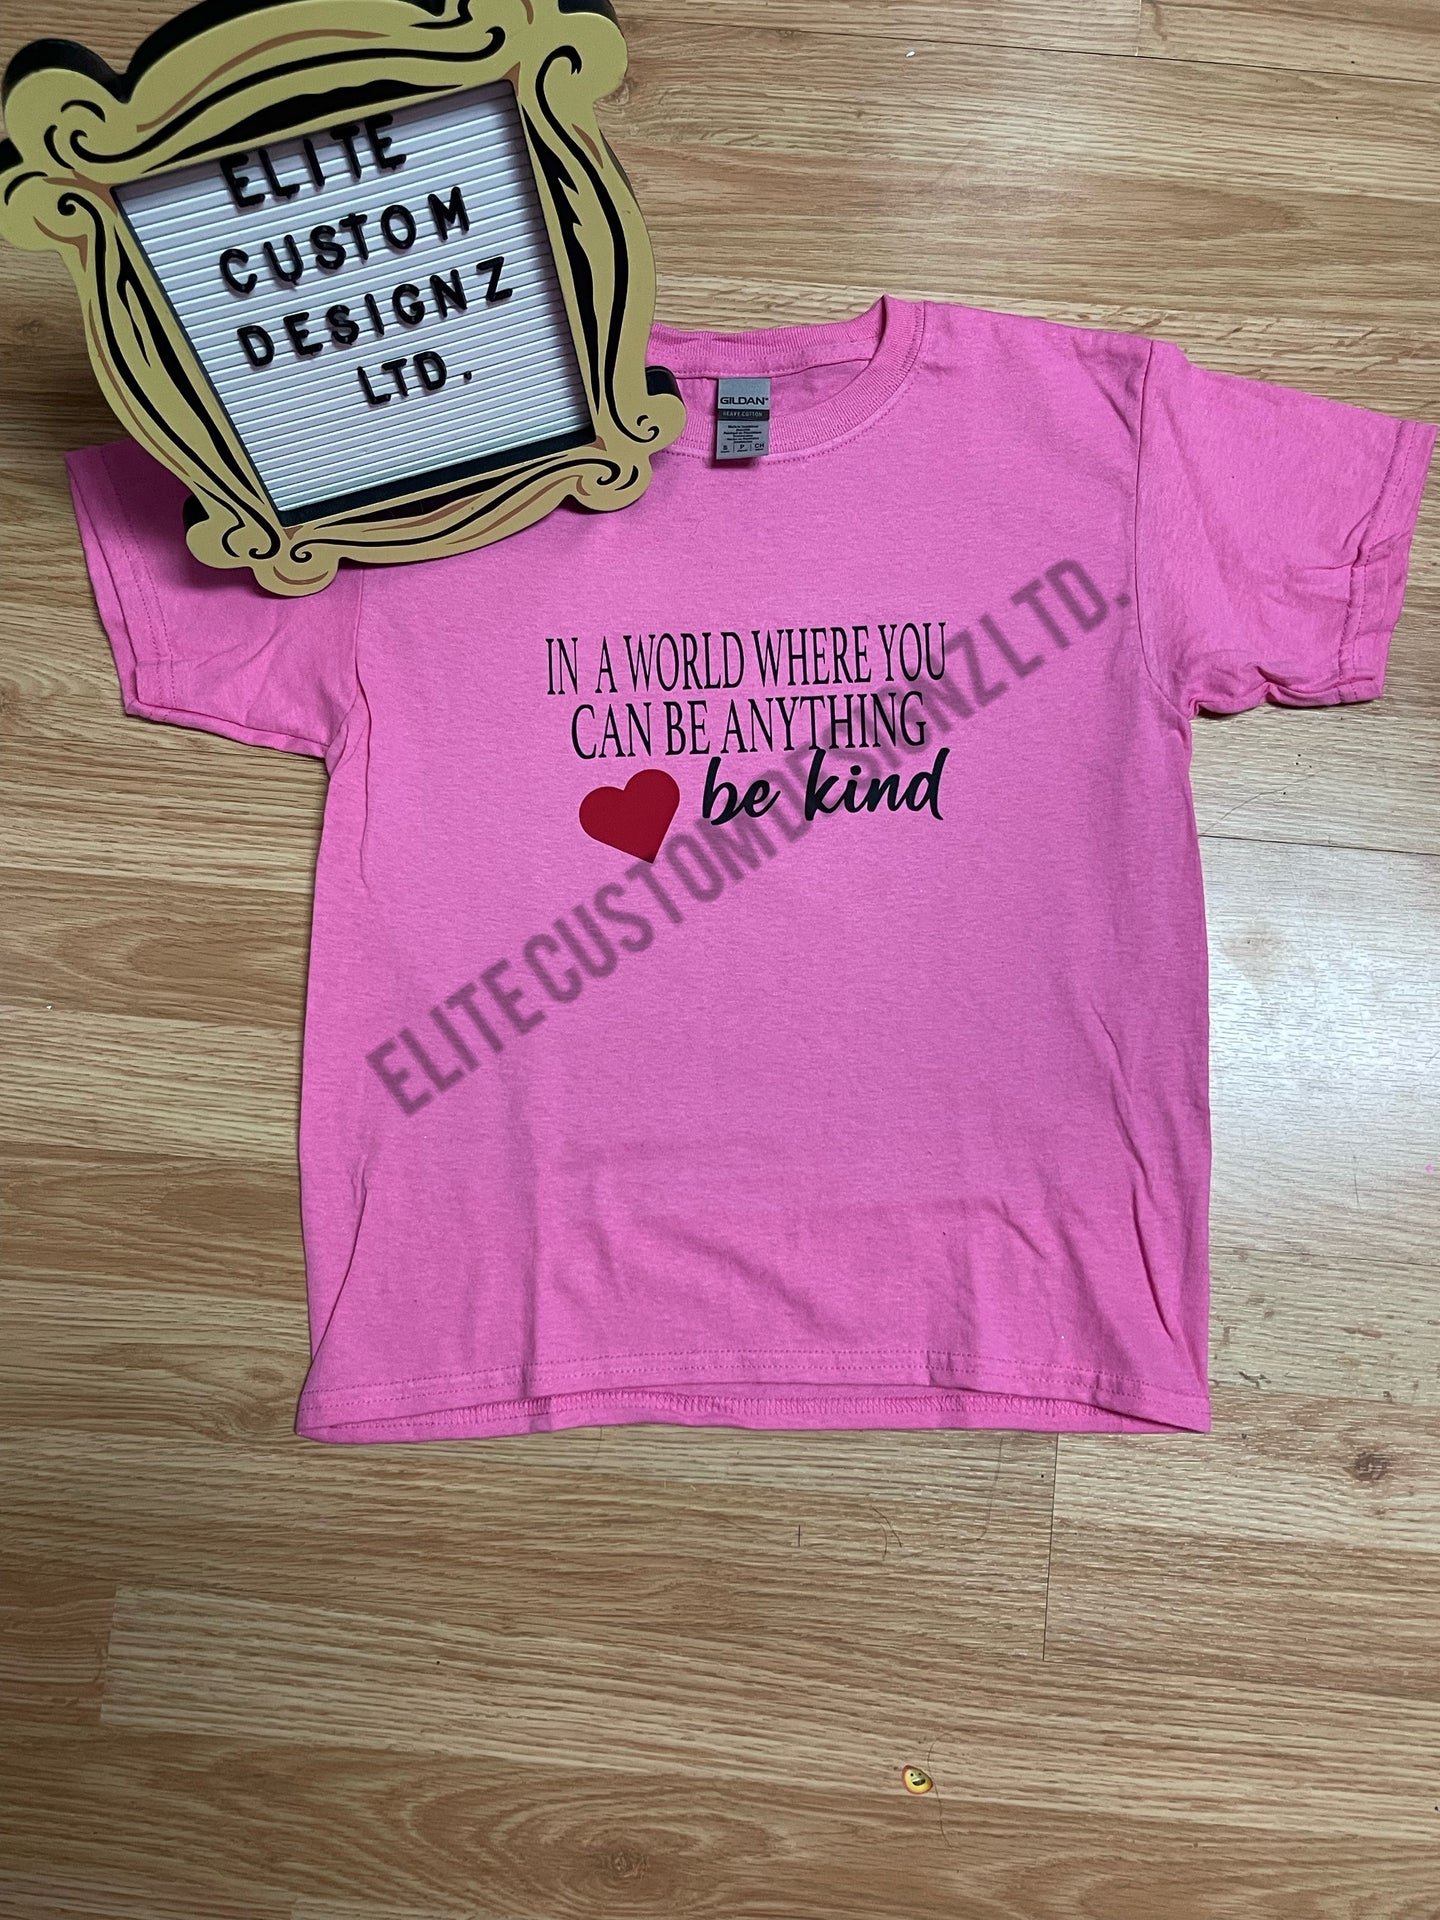 In A World Where You Can Be Anything Be Kind Kids T-Shirt | Pink Shirt Day | Pink Shirt | Kindness